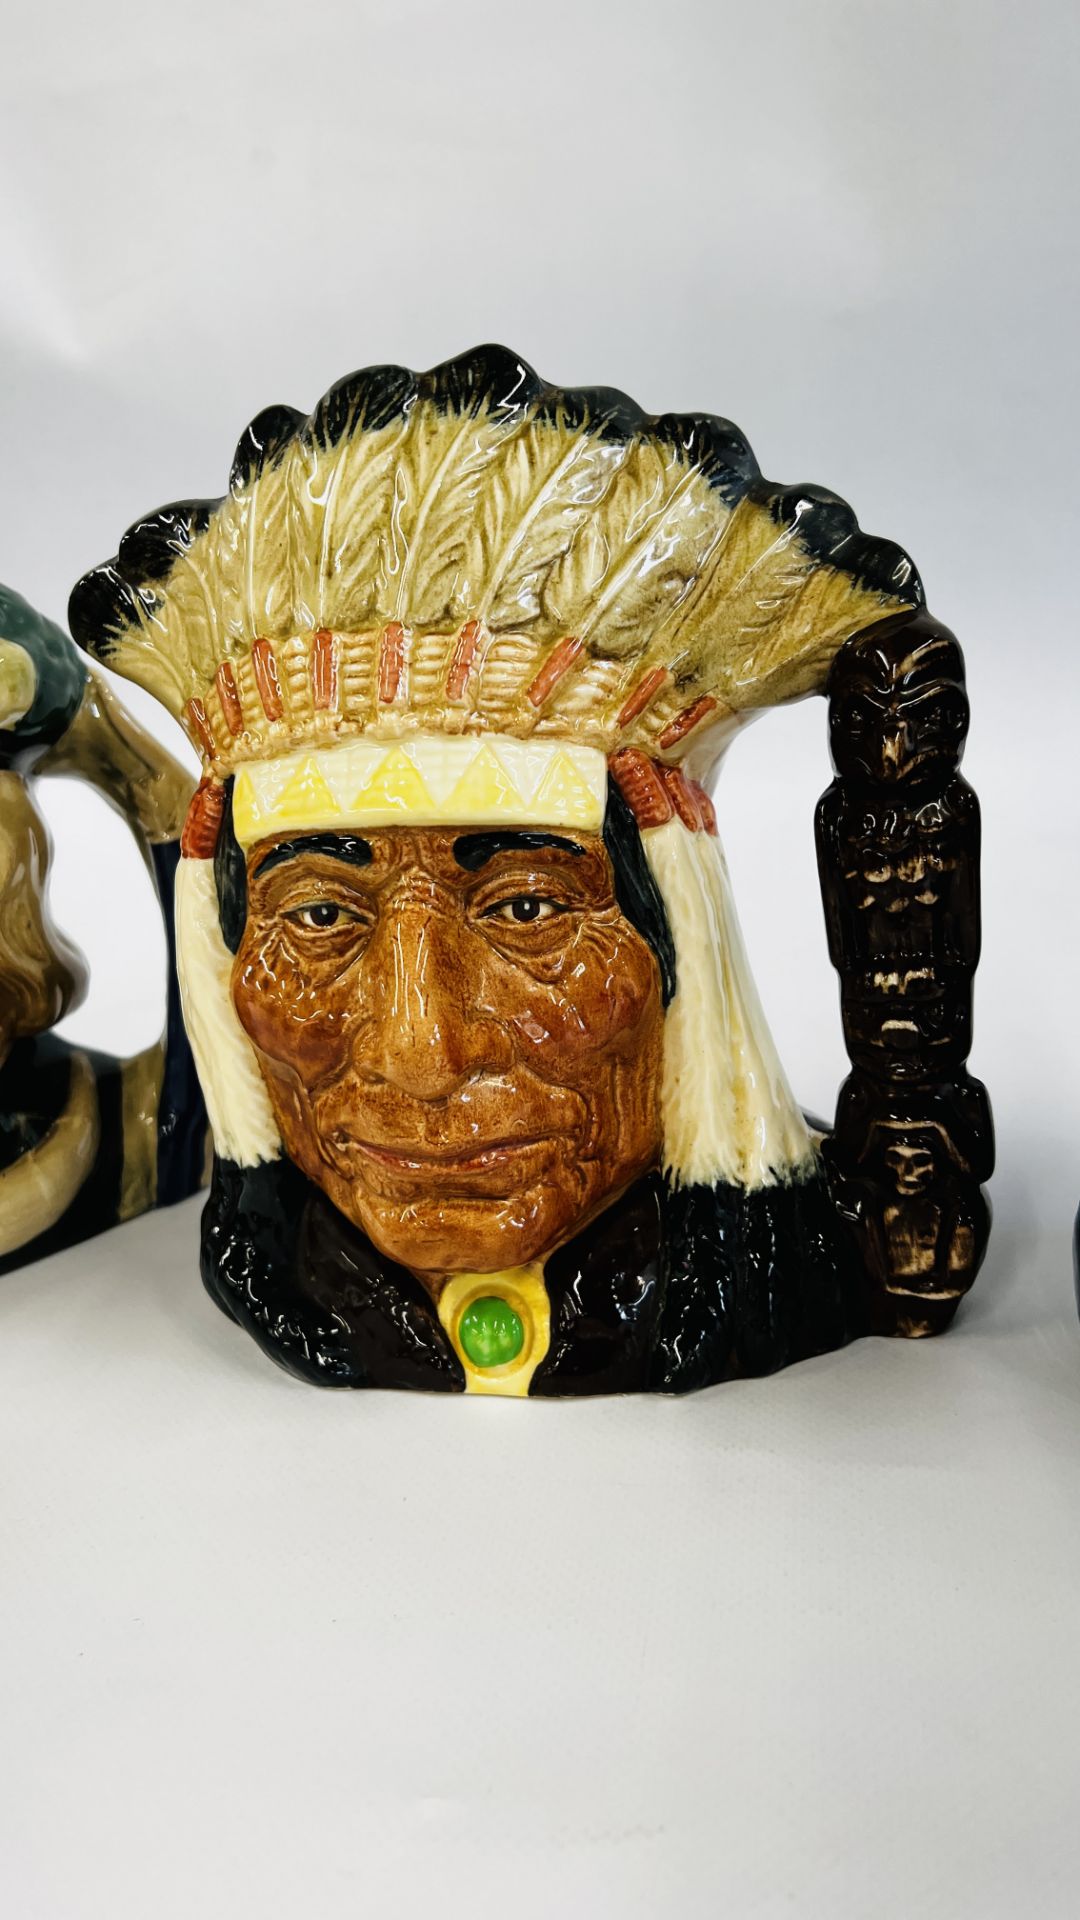 A GROUP OF 5 ROYAL DOULTON CHARACTER JUGS TO INCLUDE THE POACHER D 6429, PIED PIPER D 6403, - Image 5 of 9